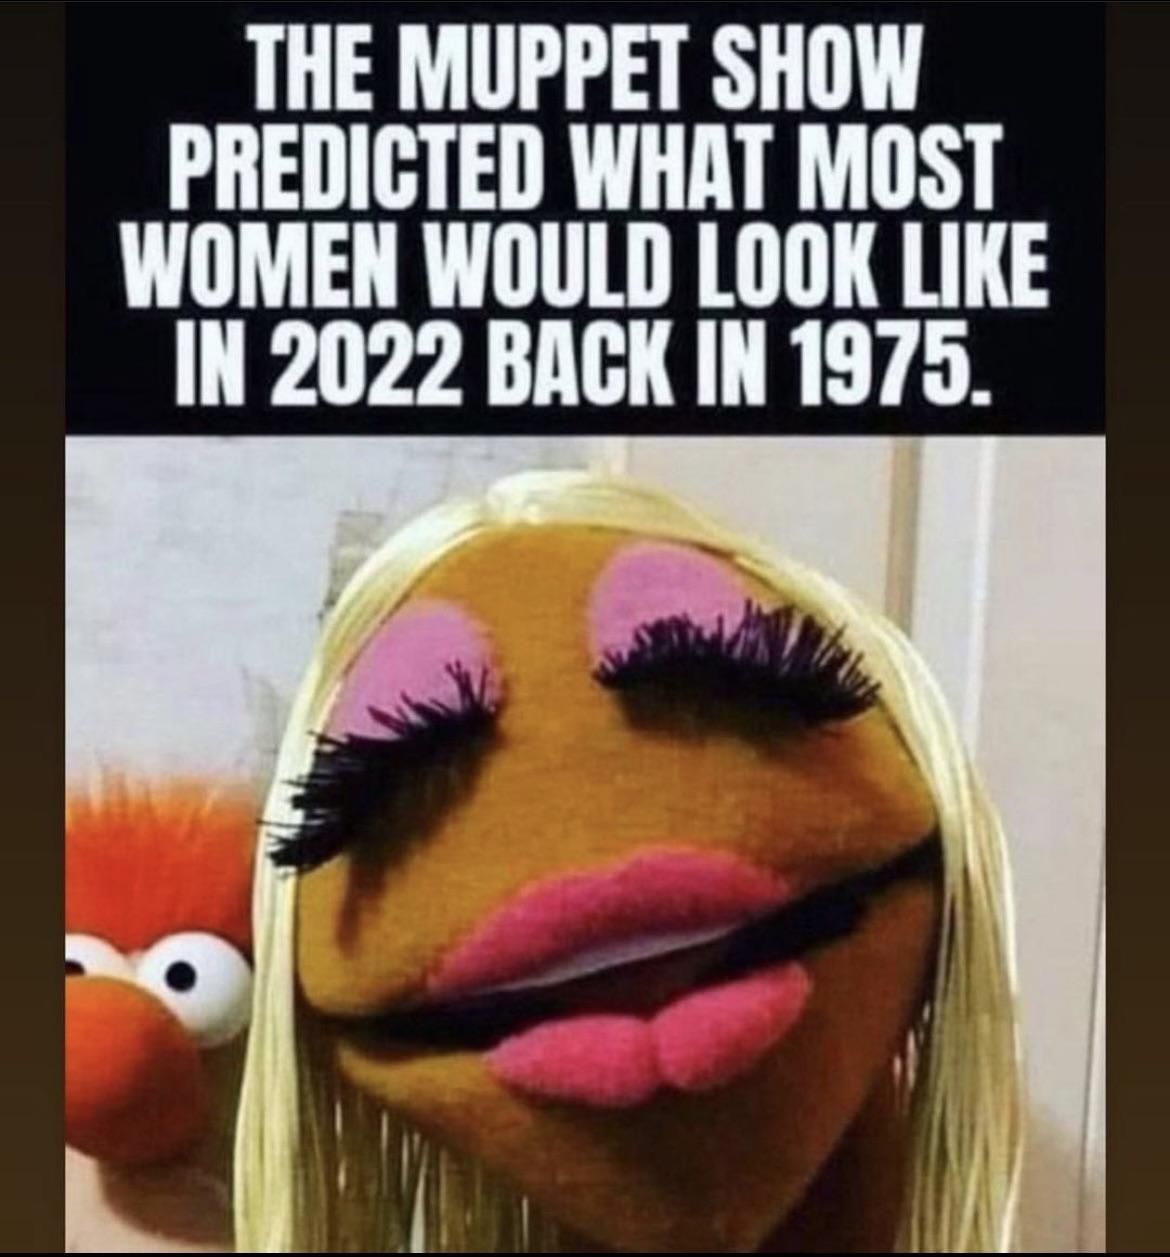 It’s all just a Muppet World